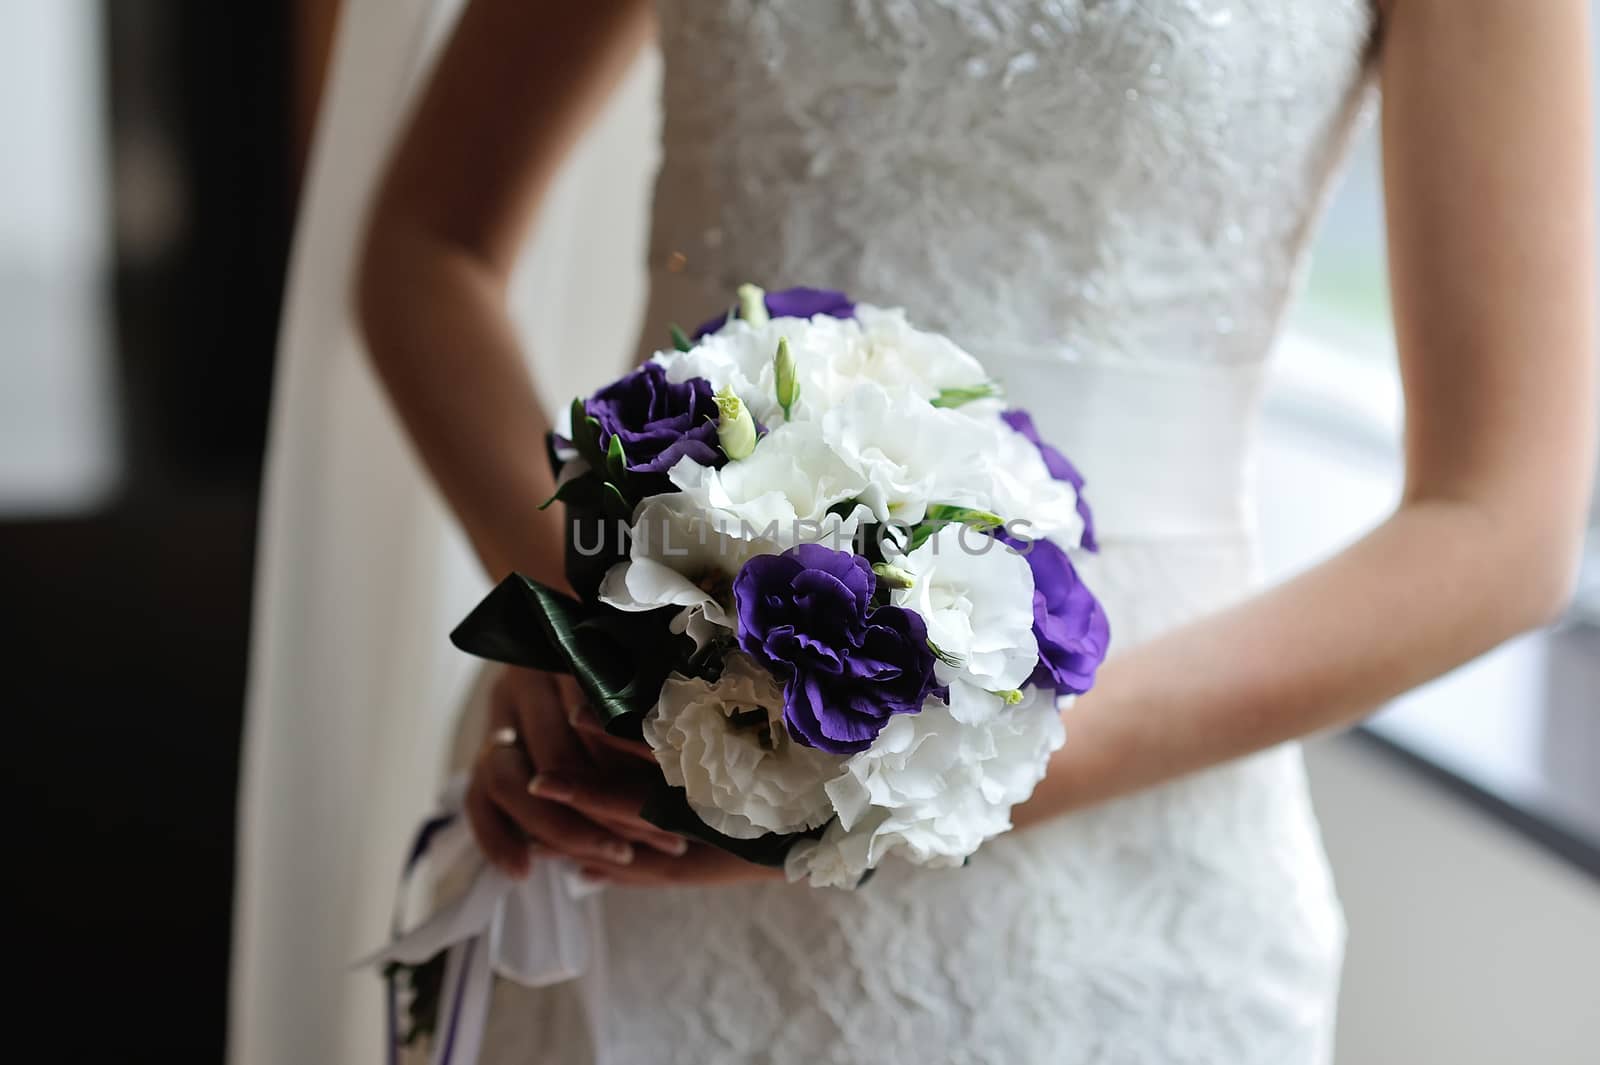 Beautiful wedding bouquet in hands of the bride by timonko